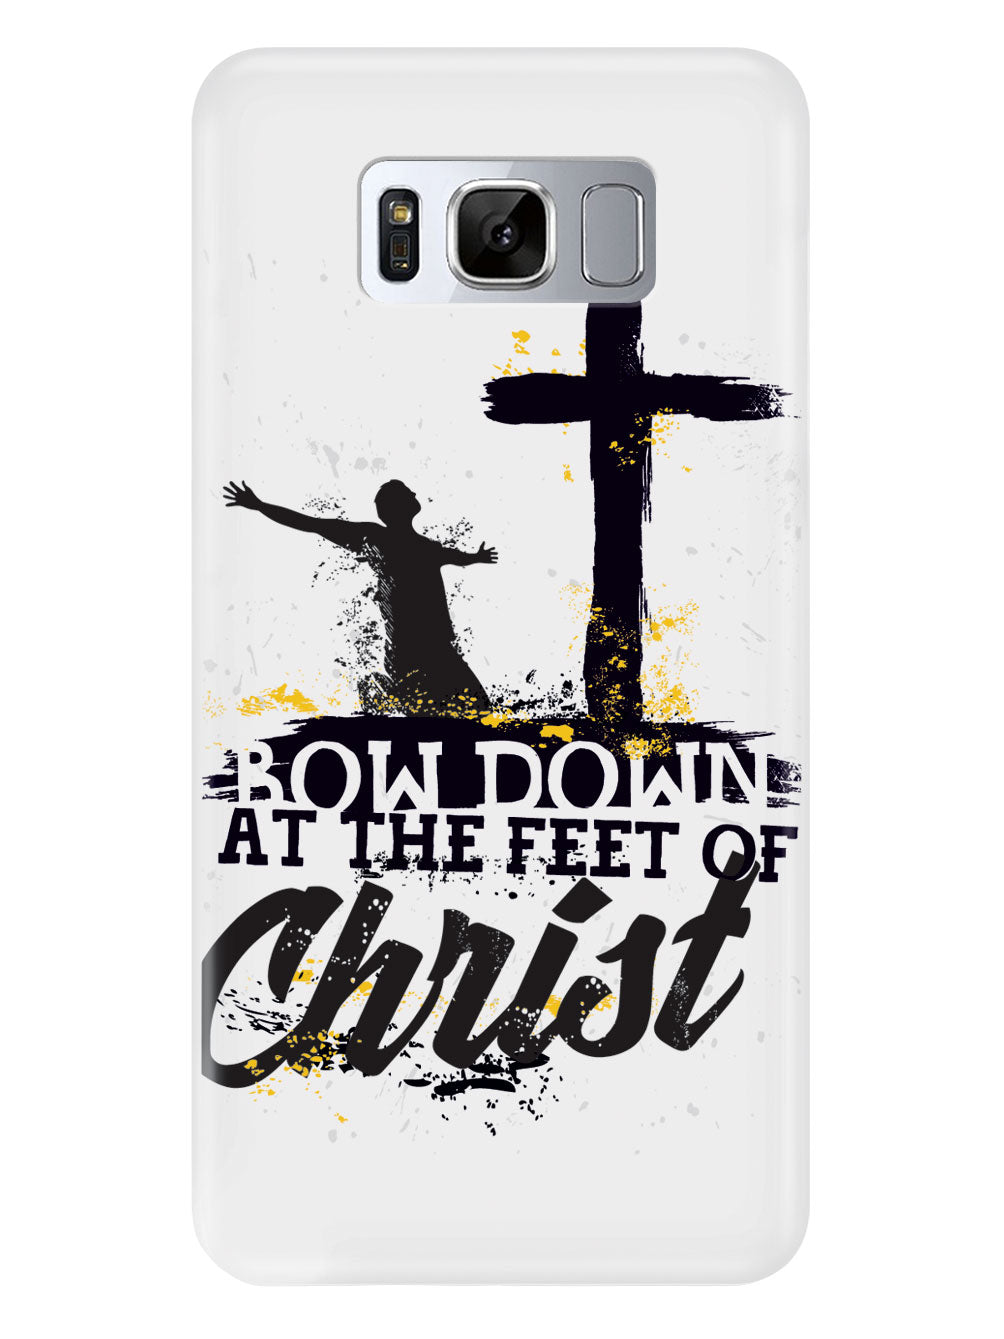 Bow Down At The Feet Of Christ - White Case